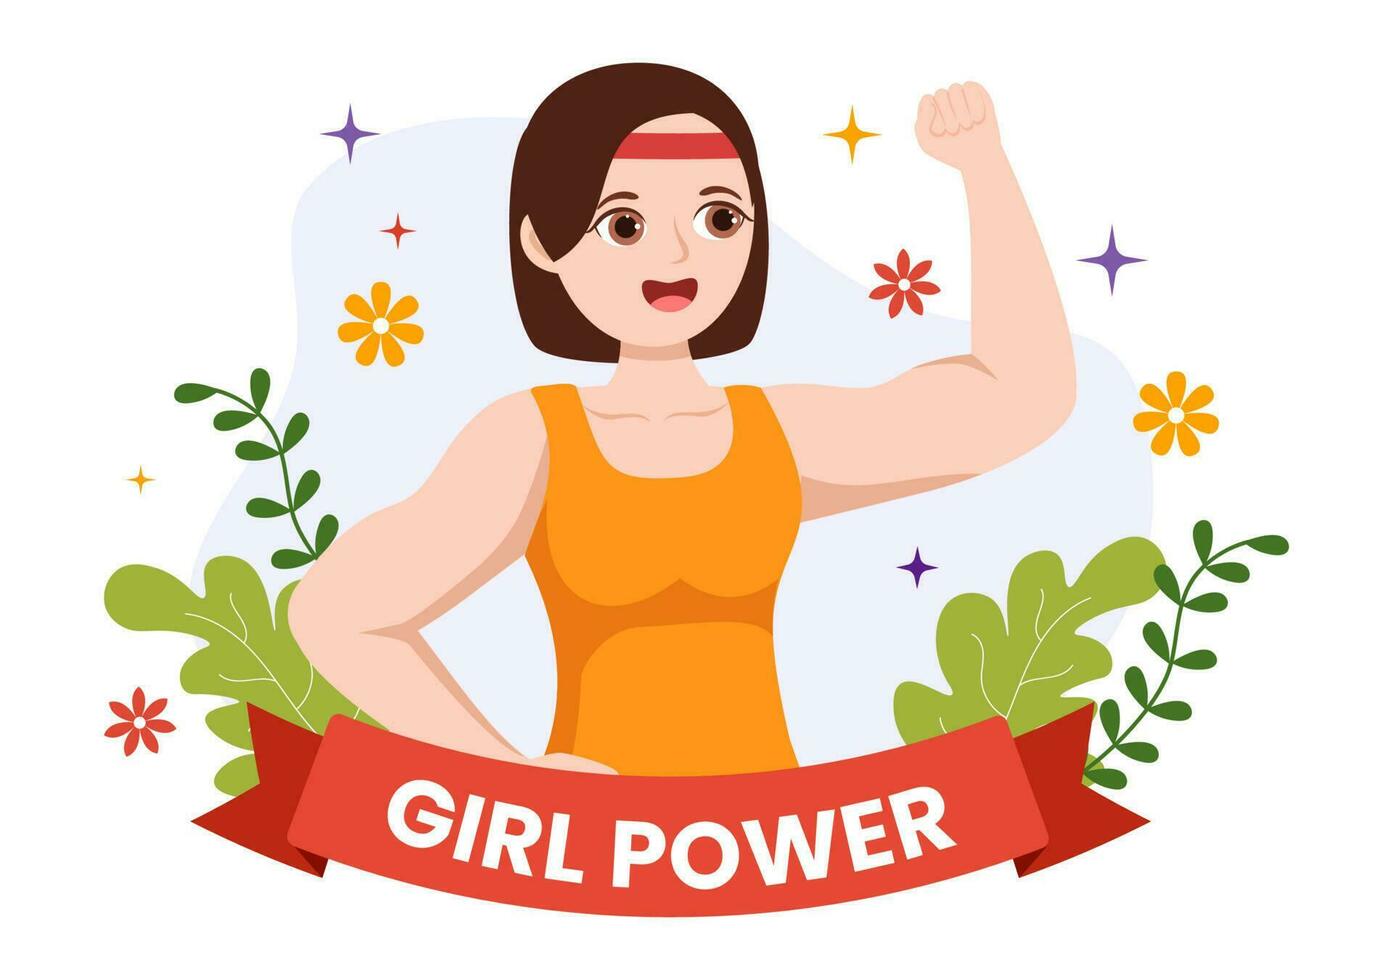 Girl Power Vector Illustration to Show Women Can Also Be Stronger and Independent in Woman Rights and Diversity Flat Cartoon Hand Drawn Templates